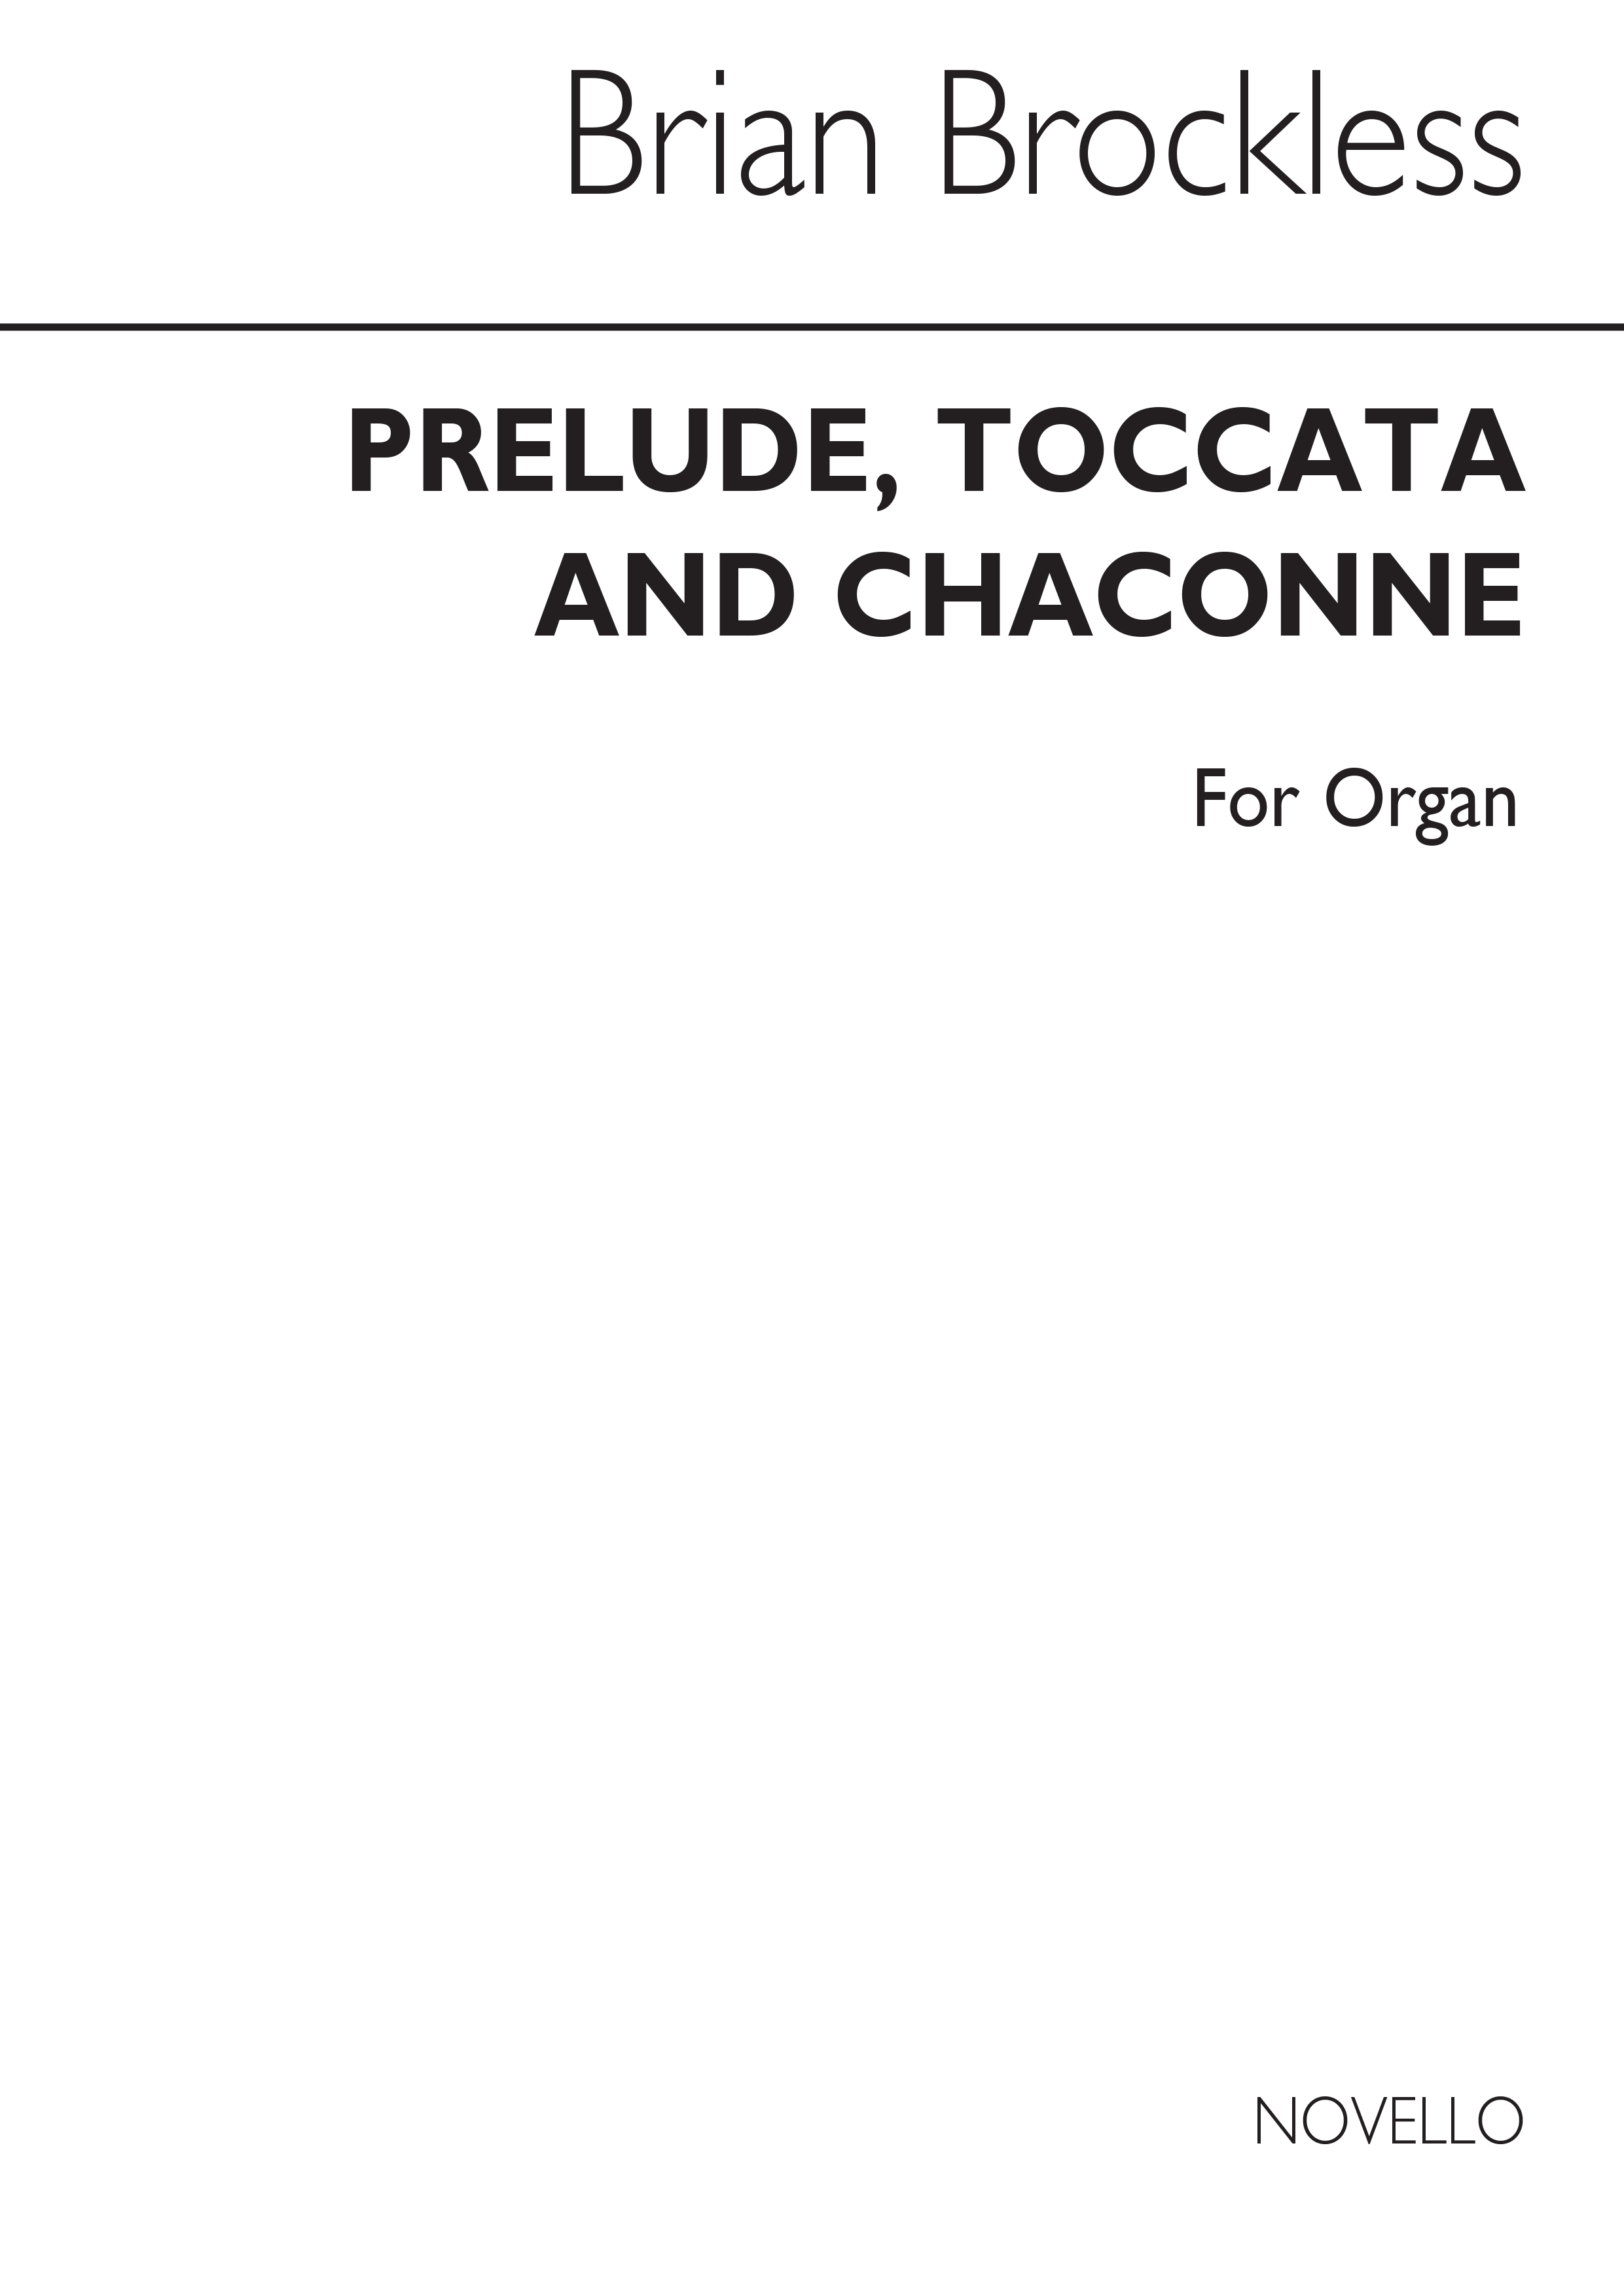 Brian Brockless: Prelude, Toccata And Chaconne Organ